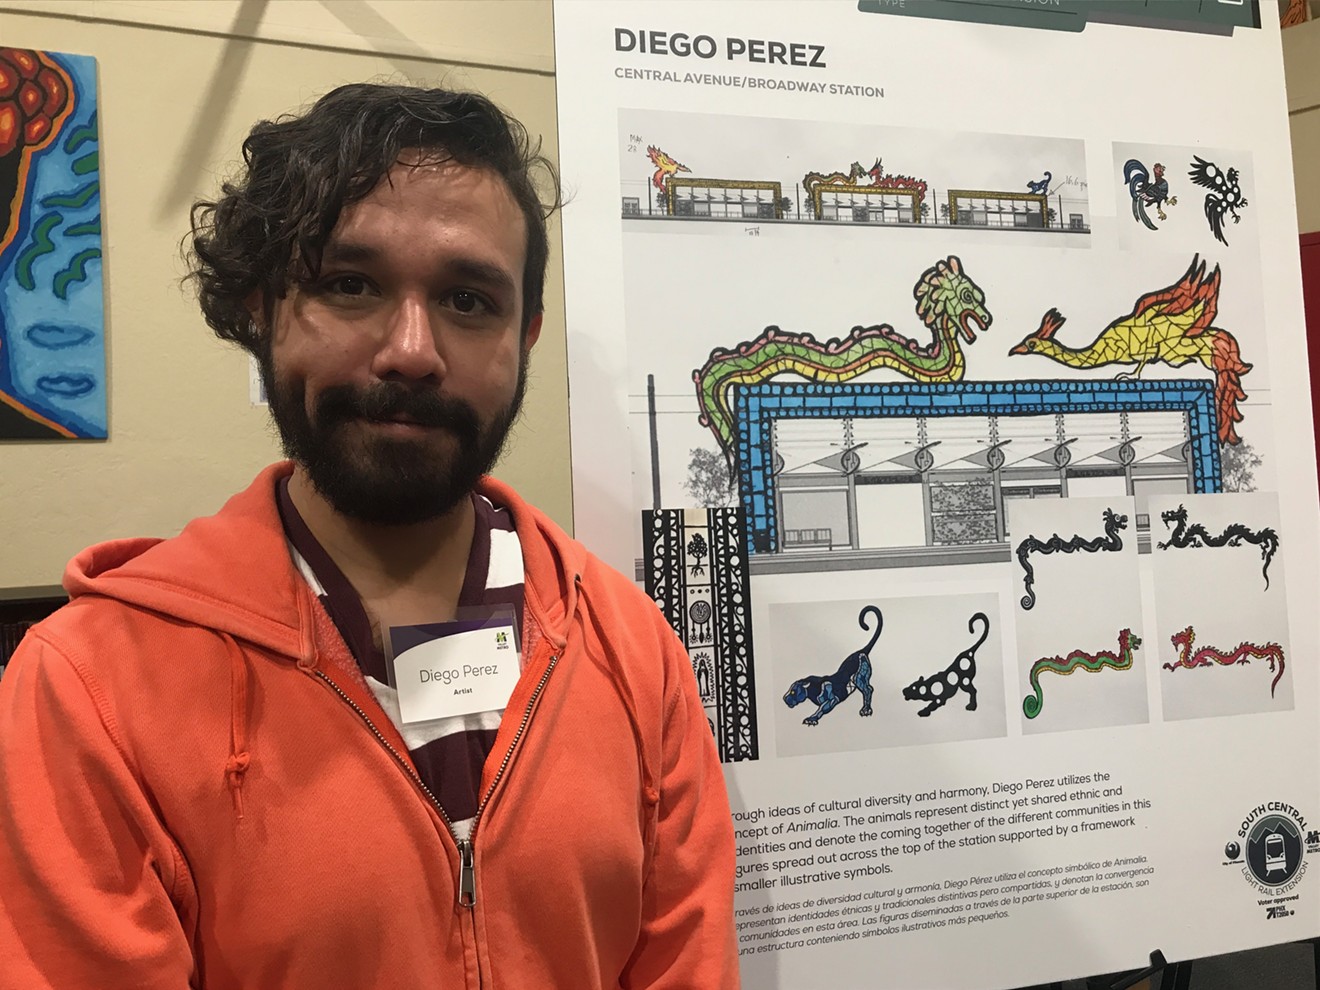 Diego Perez with an illustration for a preliminary light-rail station design.